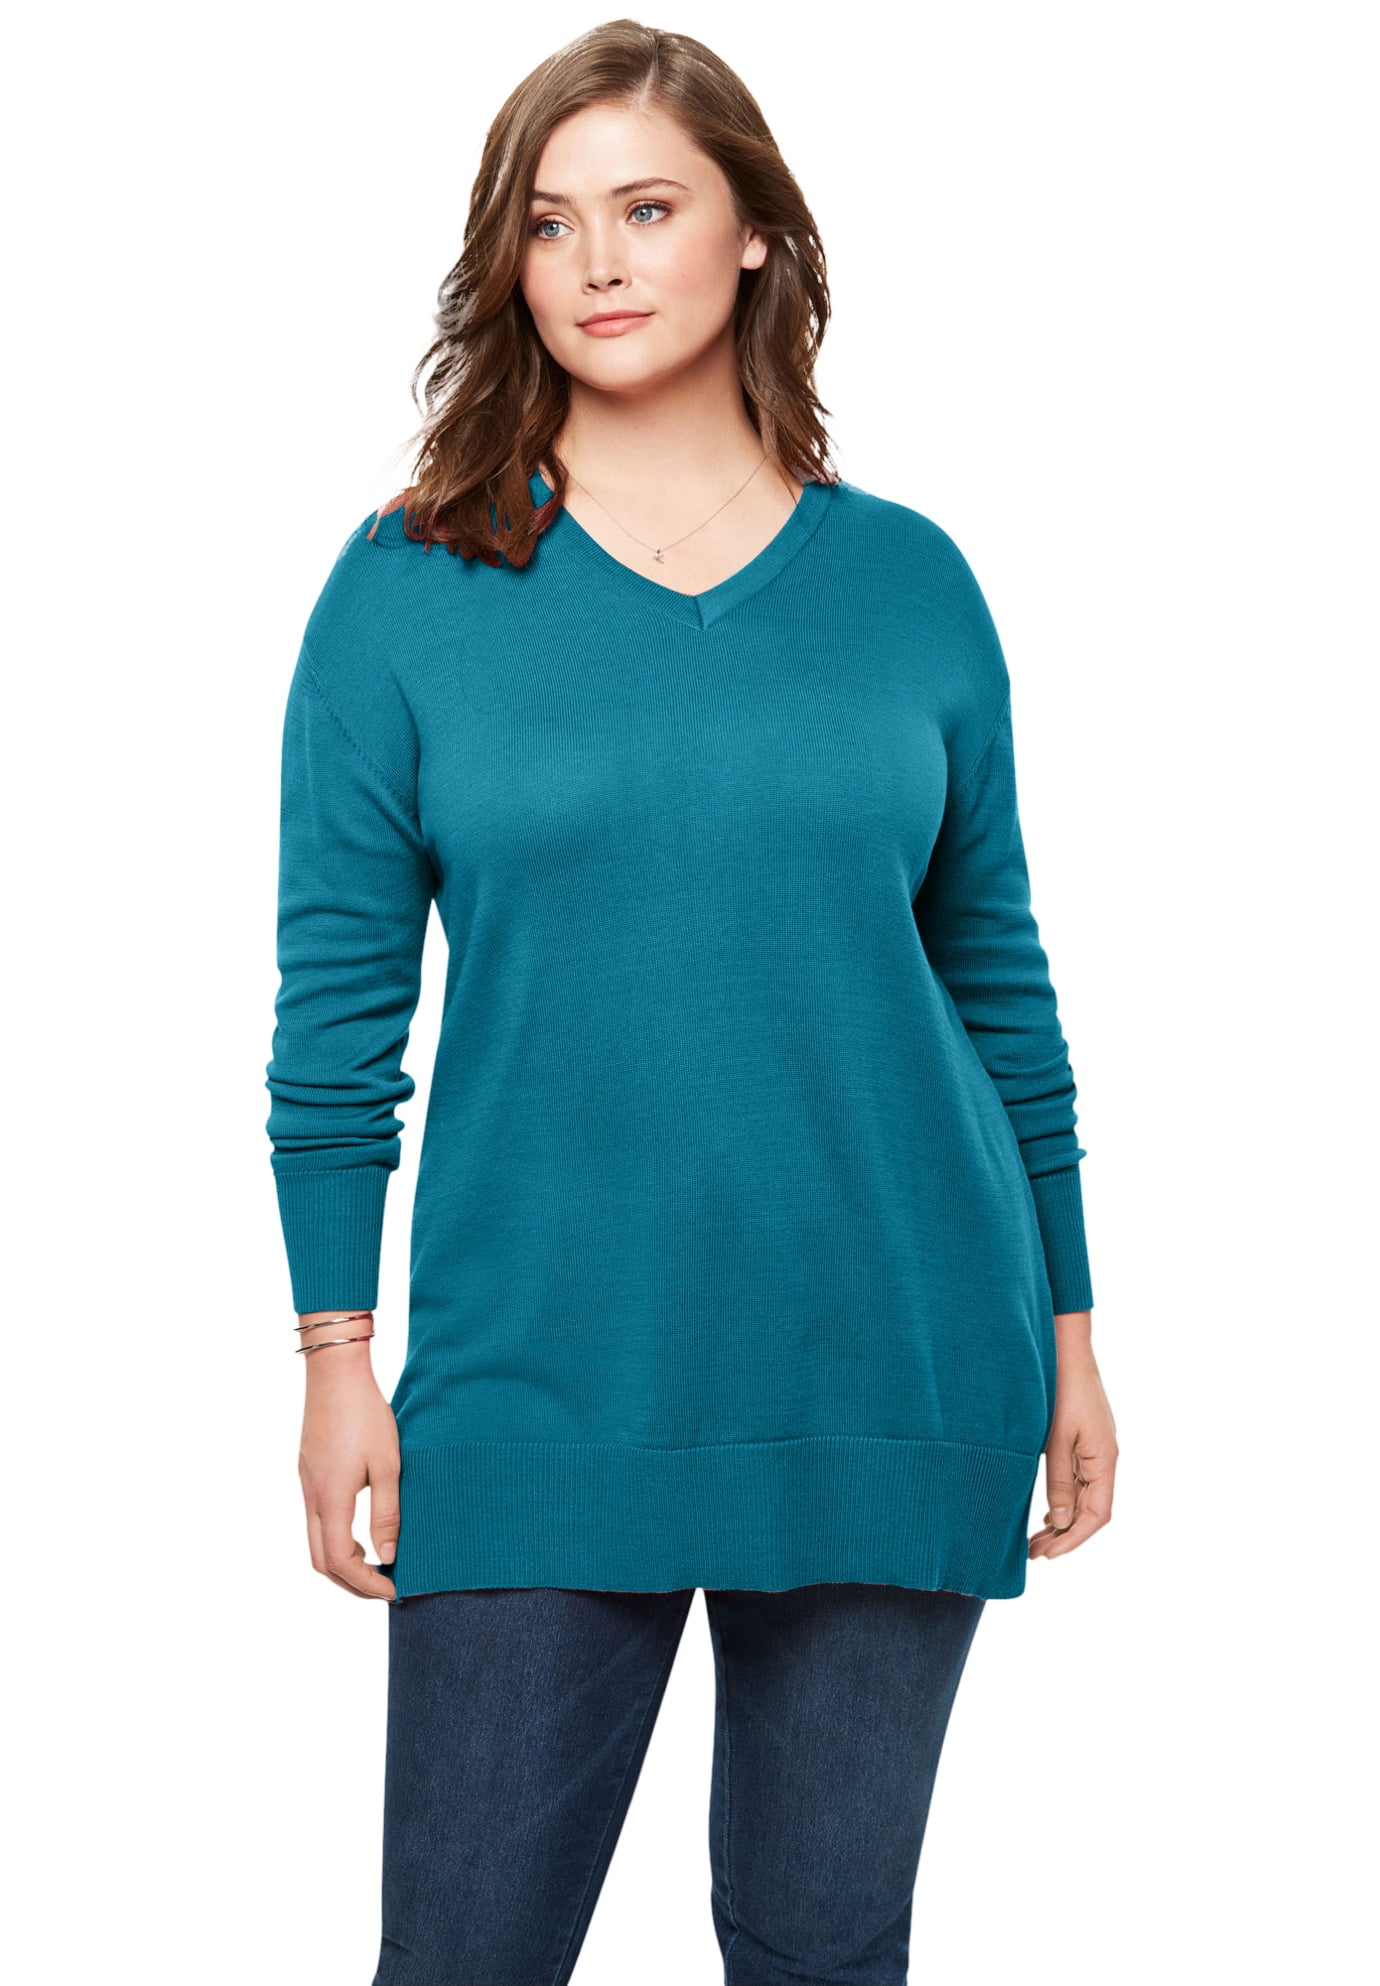 Woman Within Womens Plus Size Perfect Cotton V-Neck Sweater